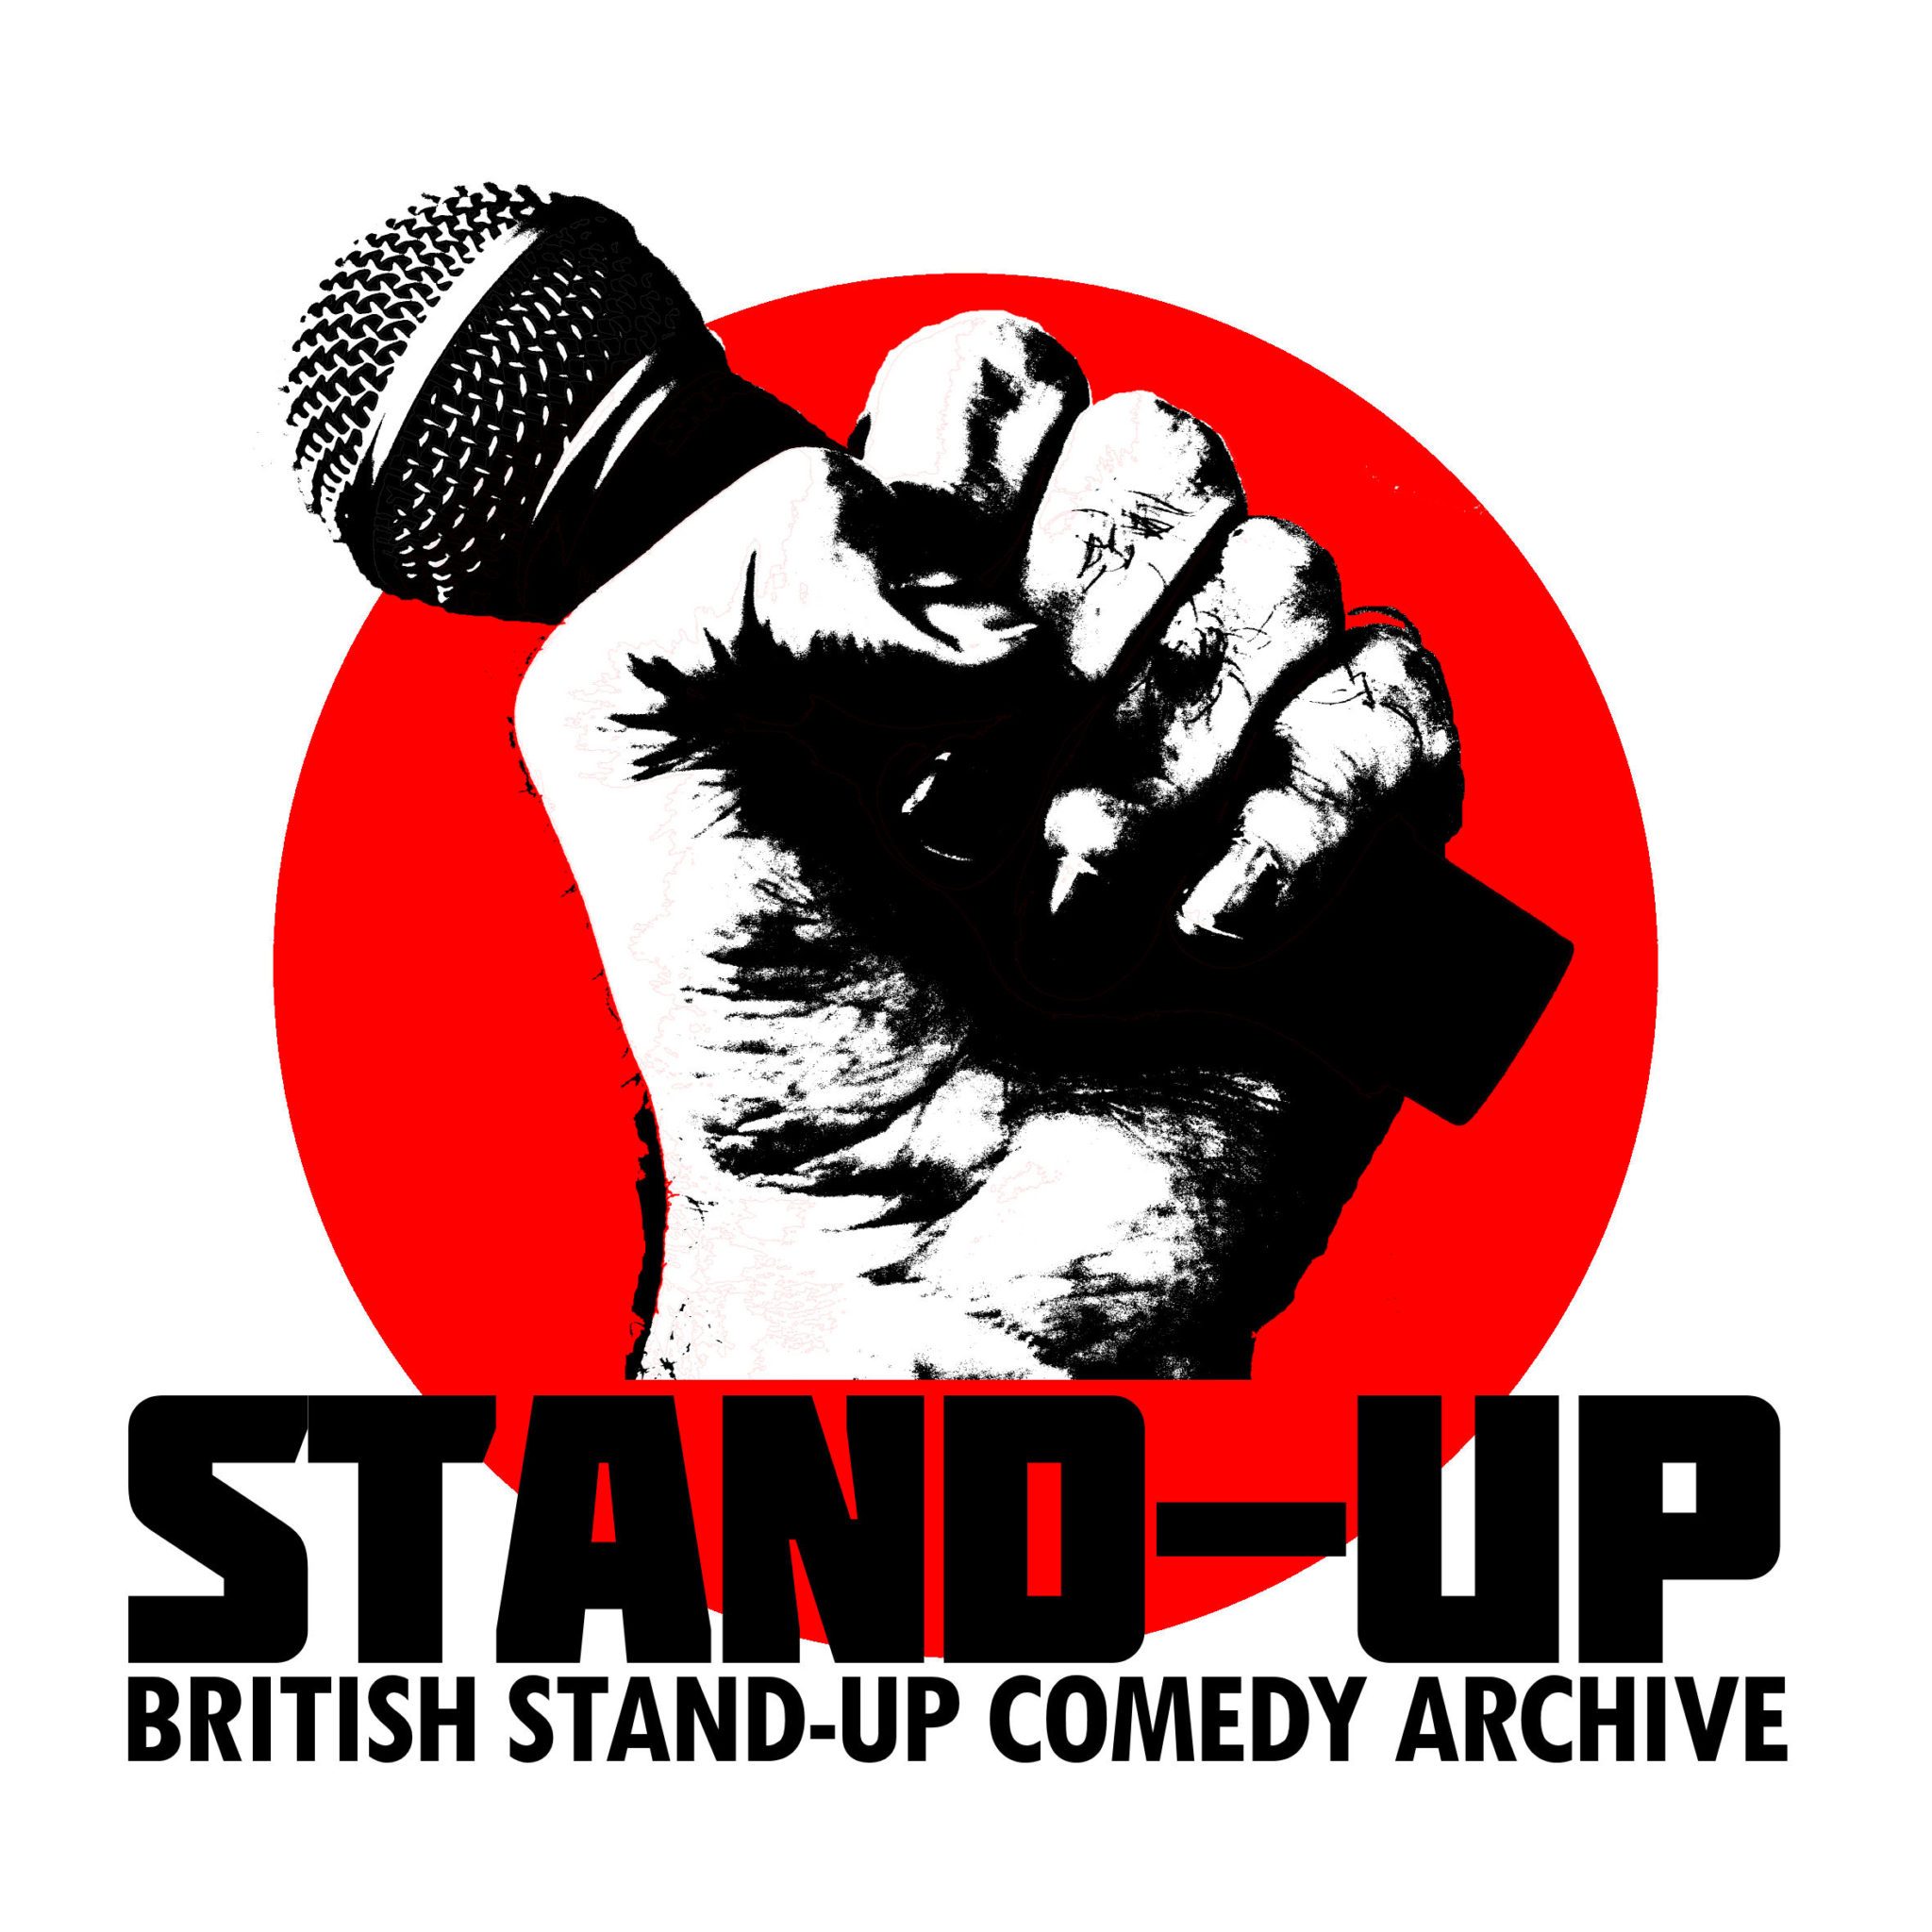 British Stand Up Comedy Archive’s audiovisual collections